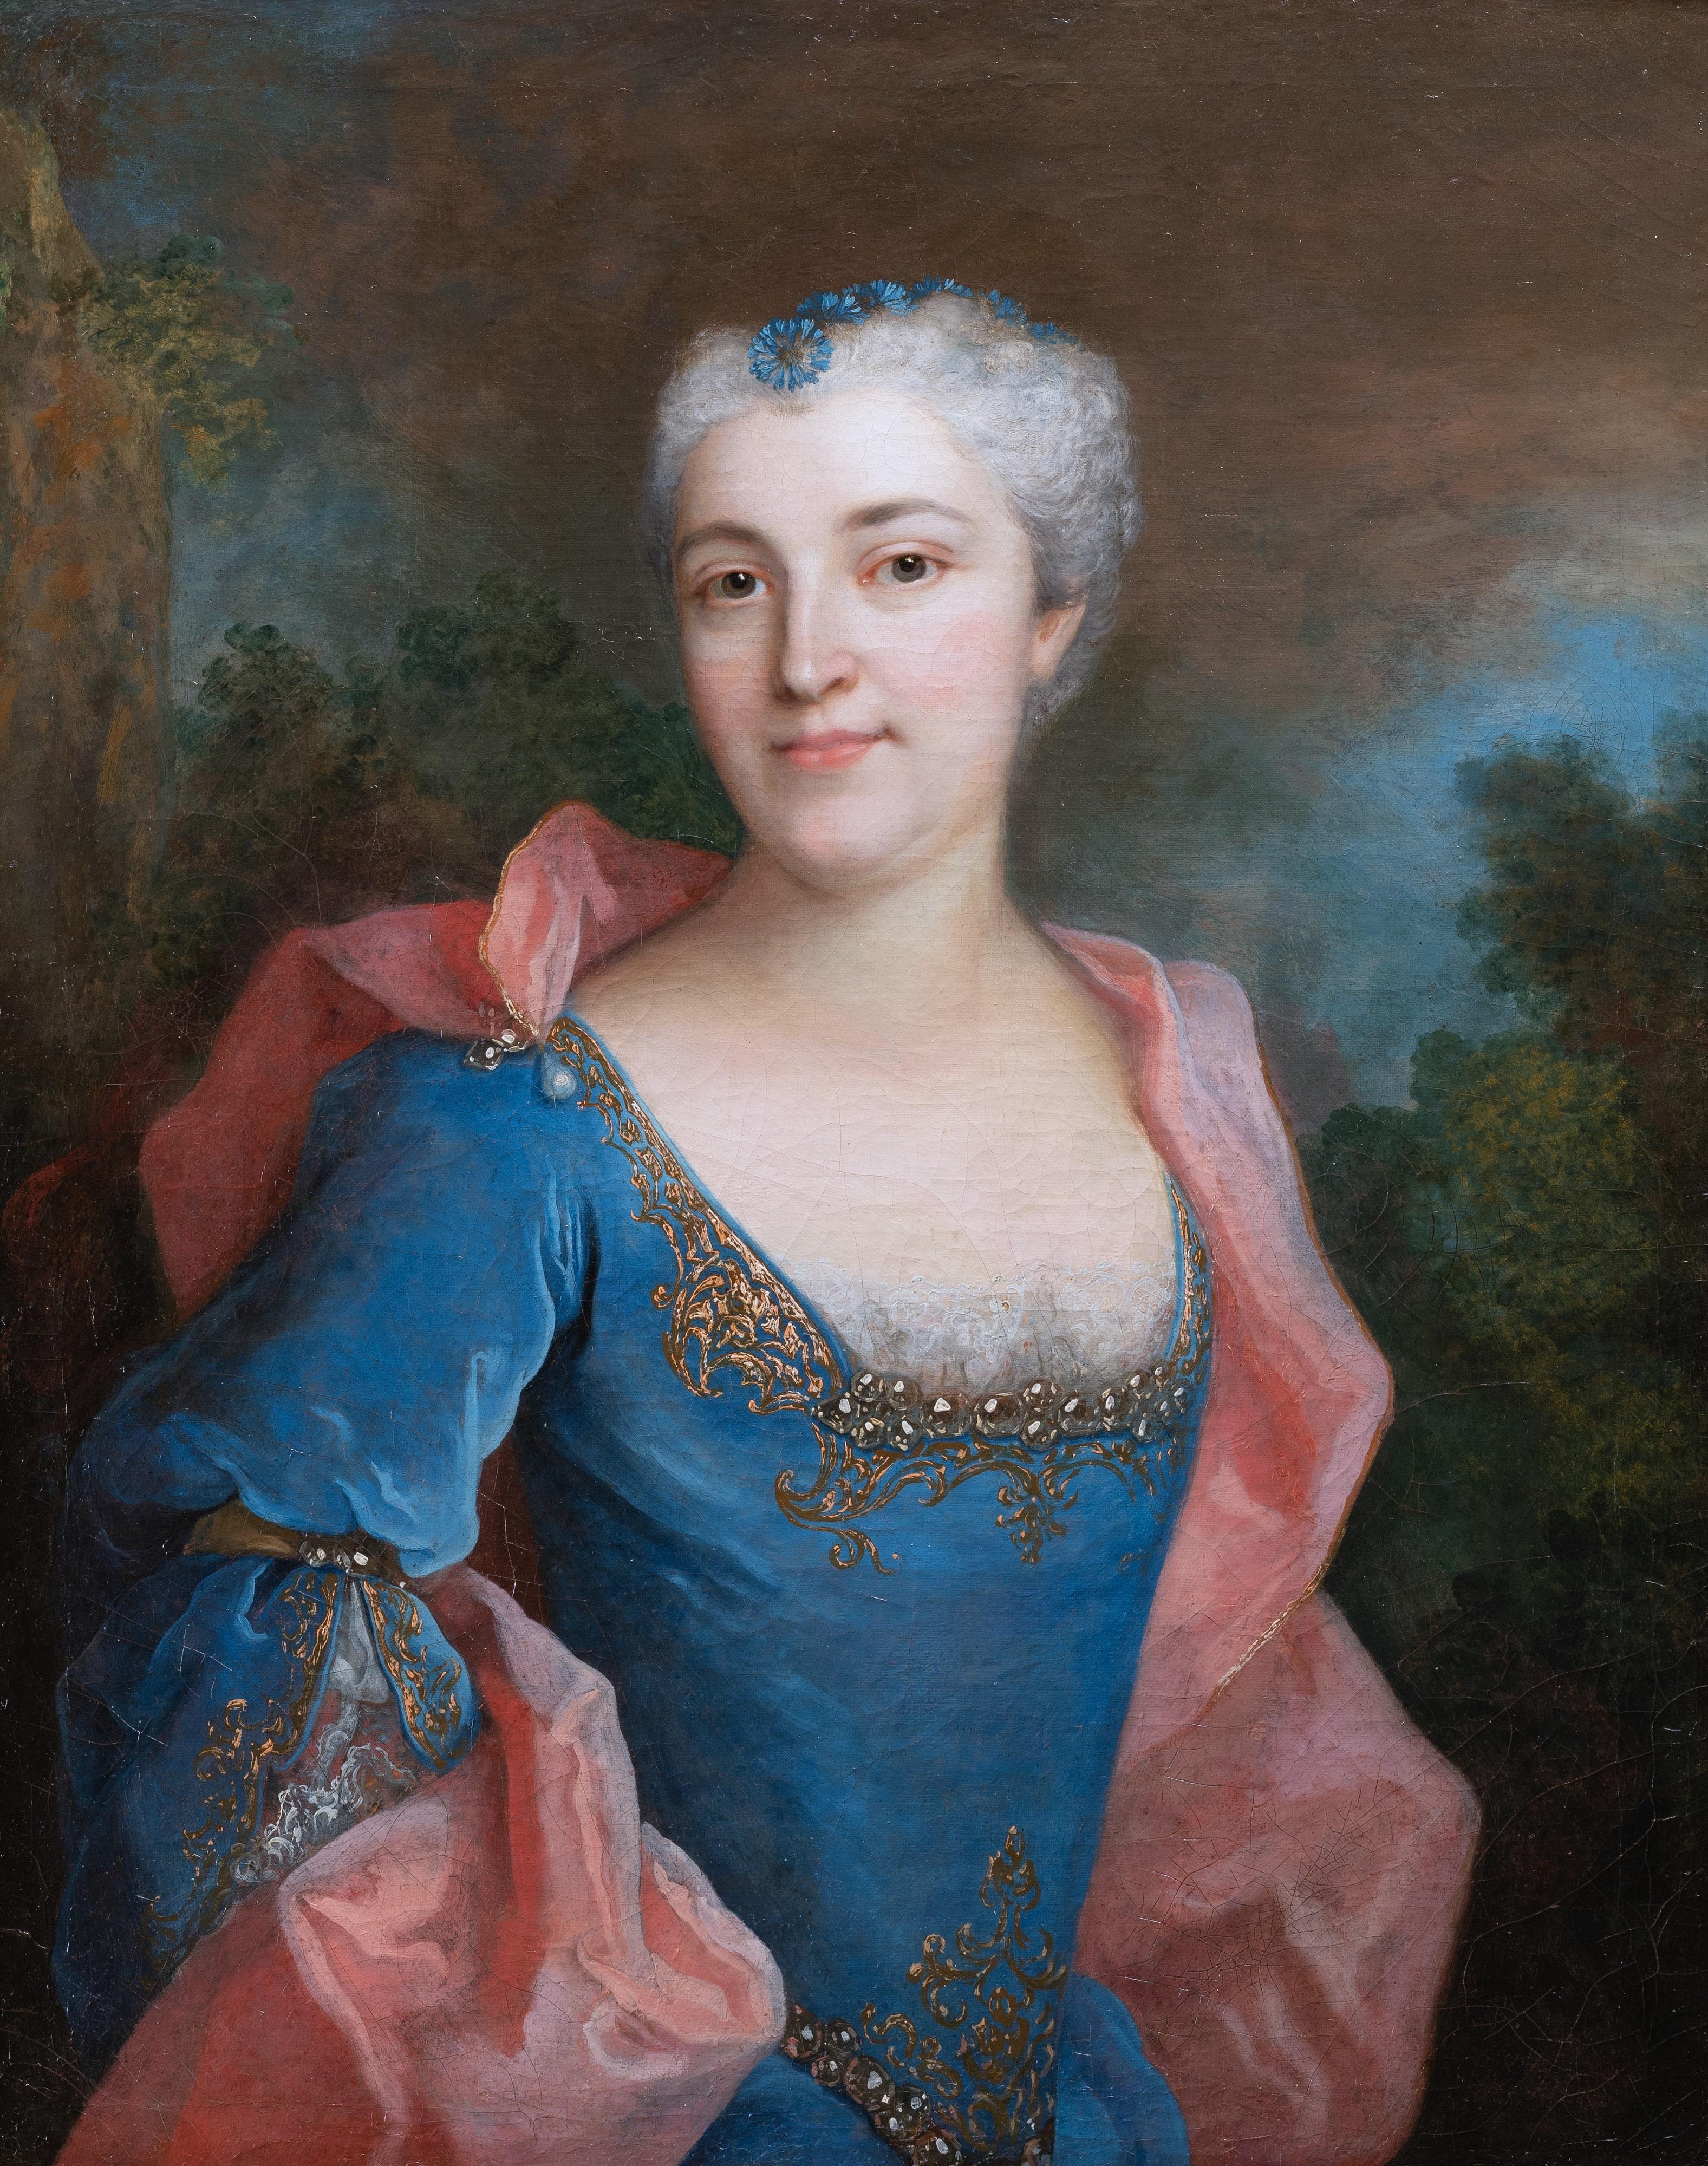 18th c. French Portrait of Louise Dorothea von Hoffman, signed H. Millot, 1724 - Painting by Henri Millot